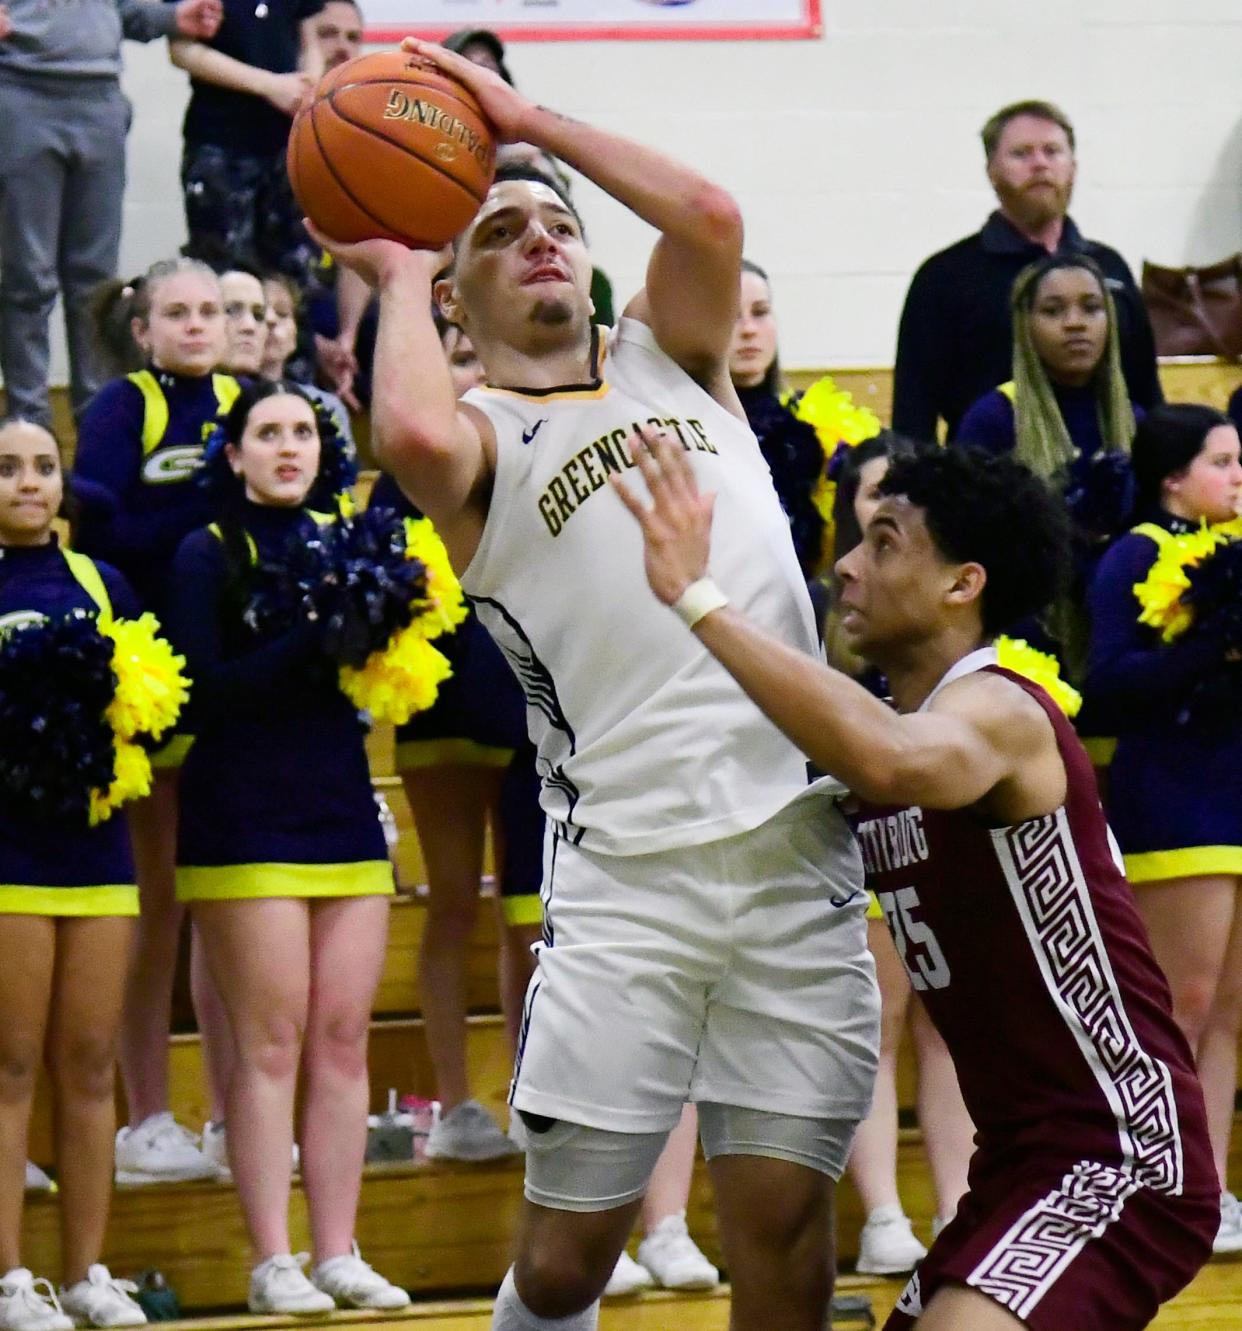 Surzano Soloman of Greencastle shoots over Gettysburg's Kayson Johnson during the Blue Devils' overtime victory. Soloman and the rest of the squad won the Mid-Penn Colonial Division, earning a chance to play in the conference tournament.